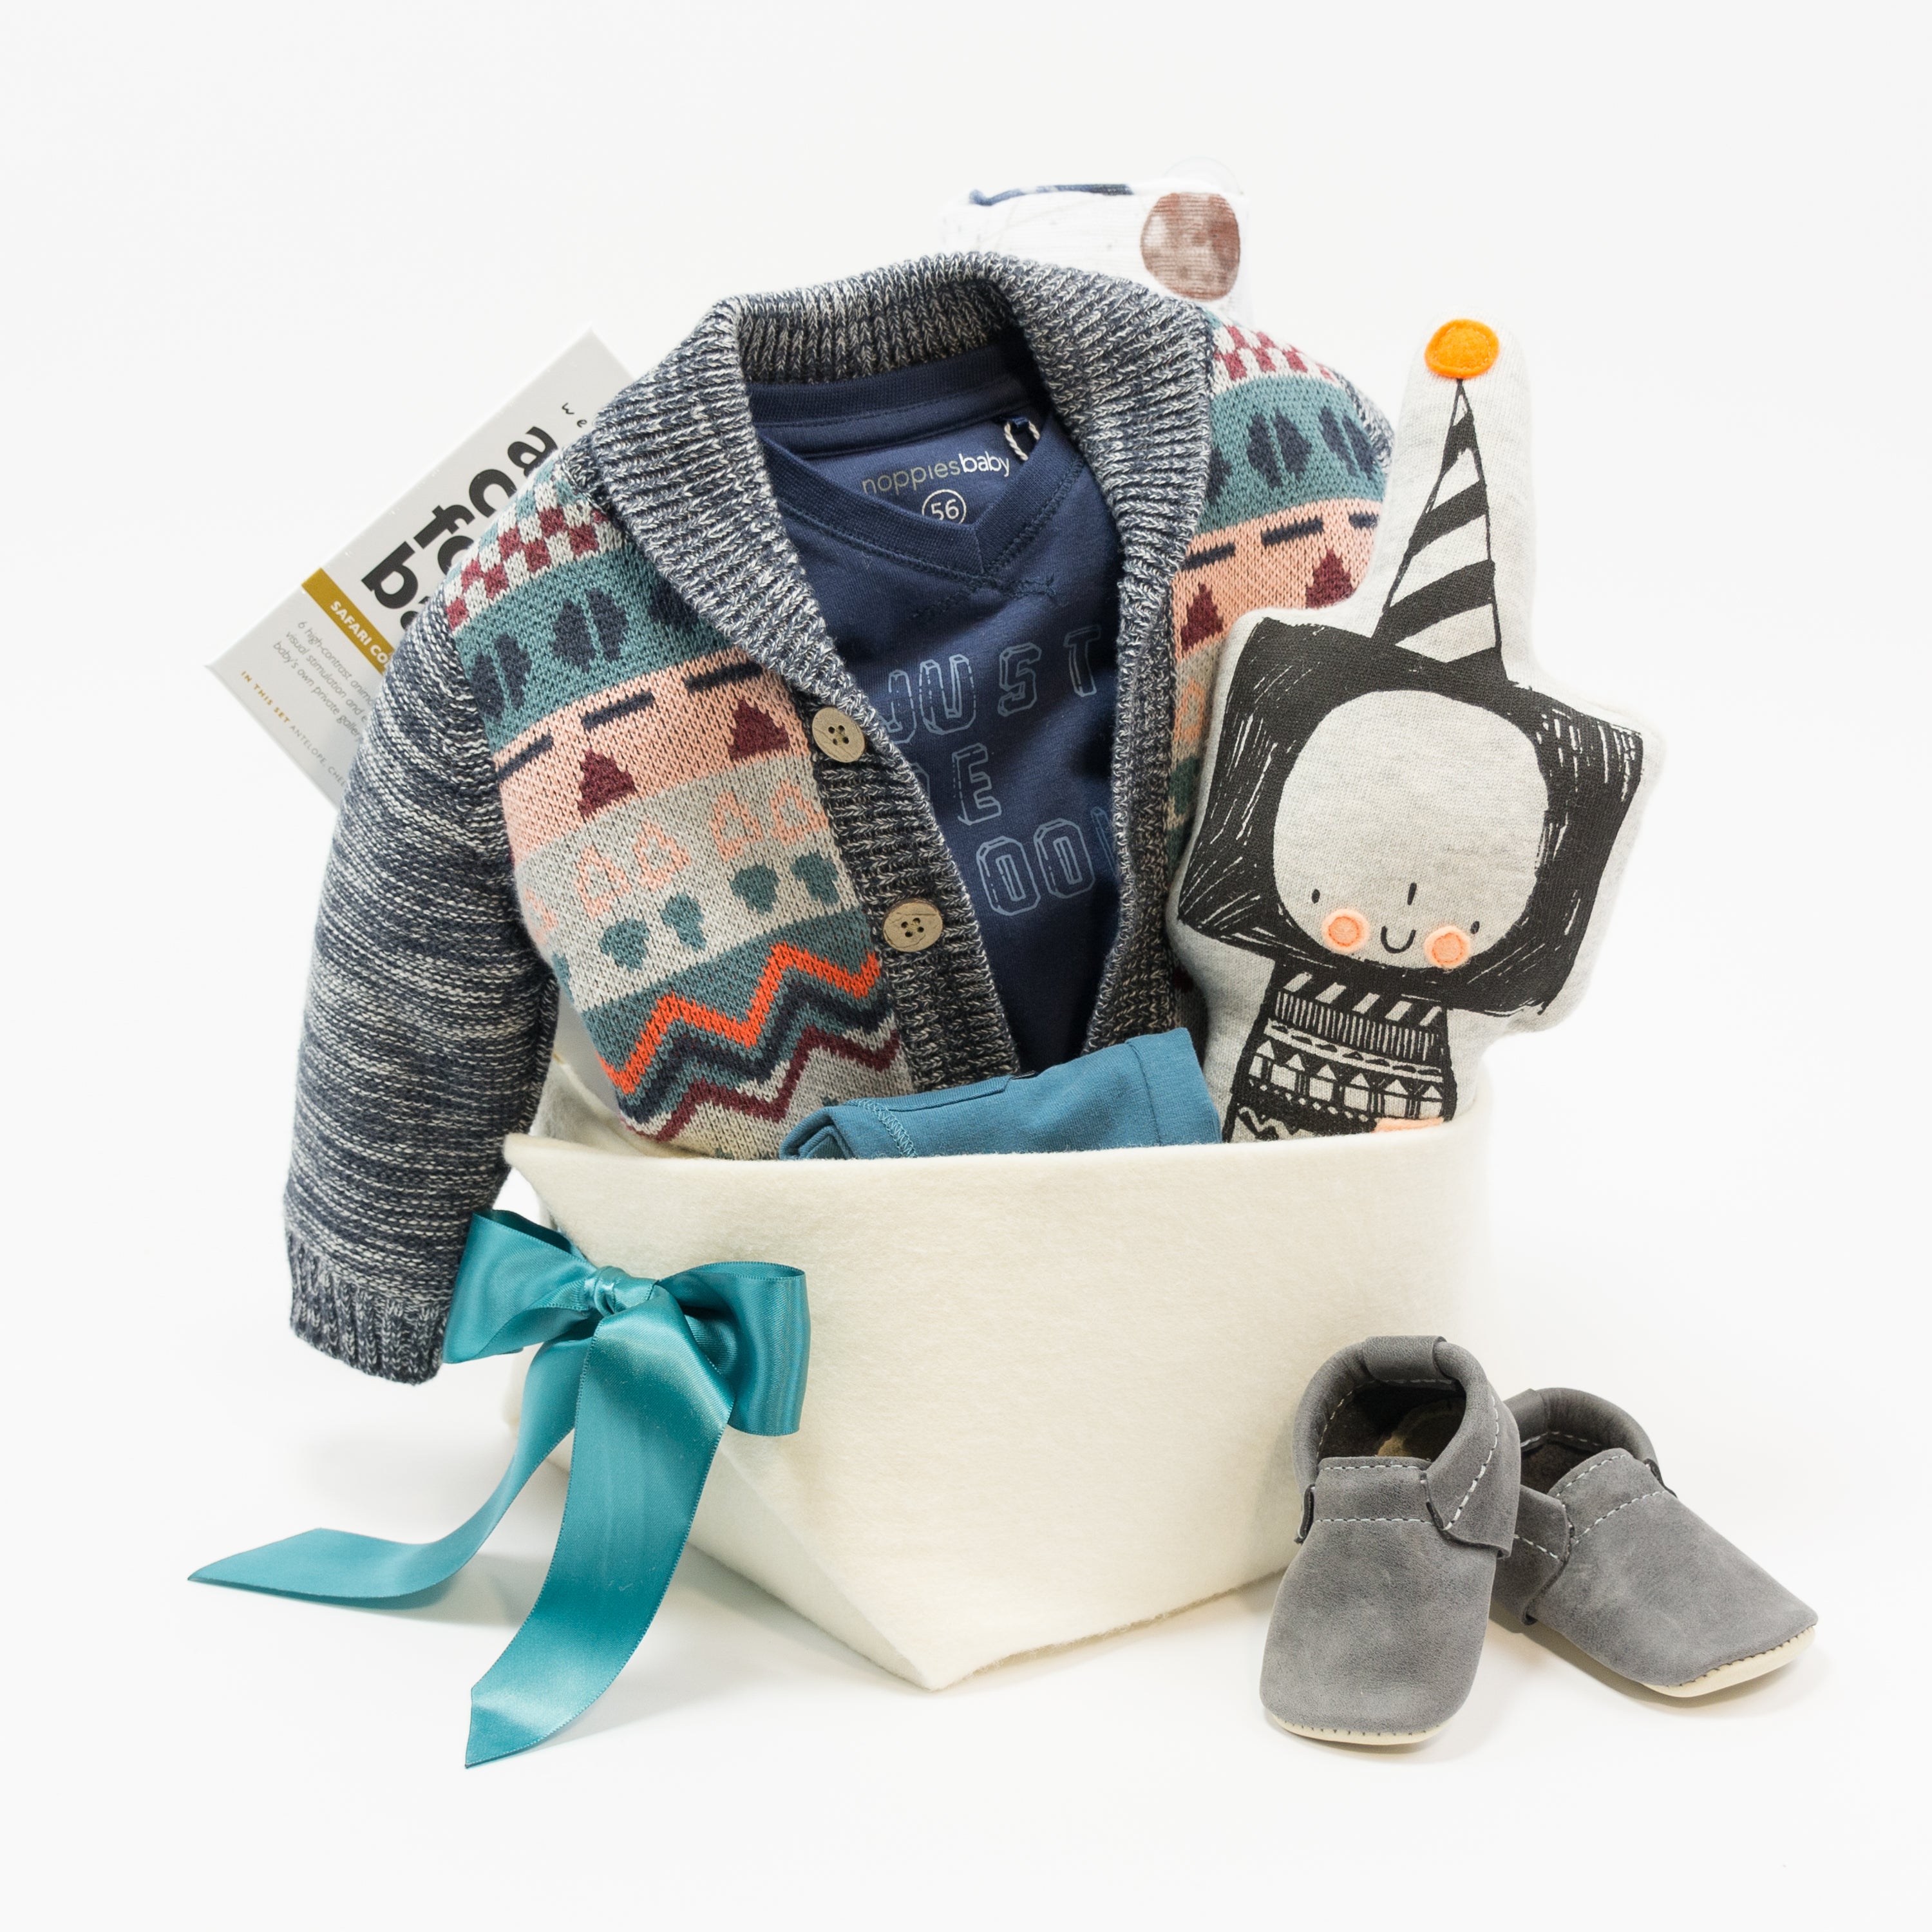 Luxury Baby Gift Basket at Bonjour Baby Baskets 